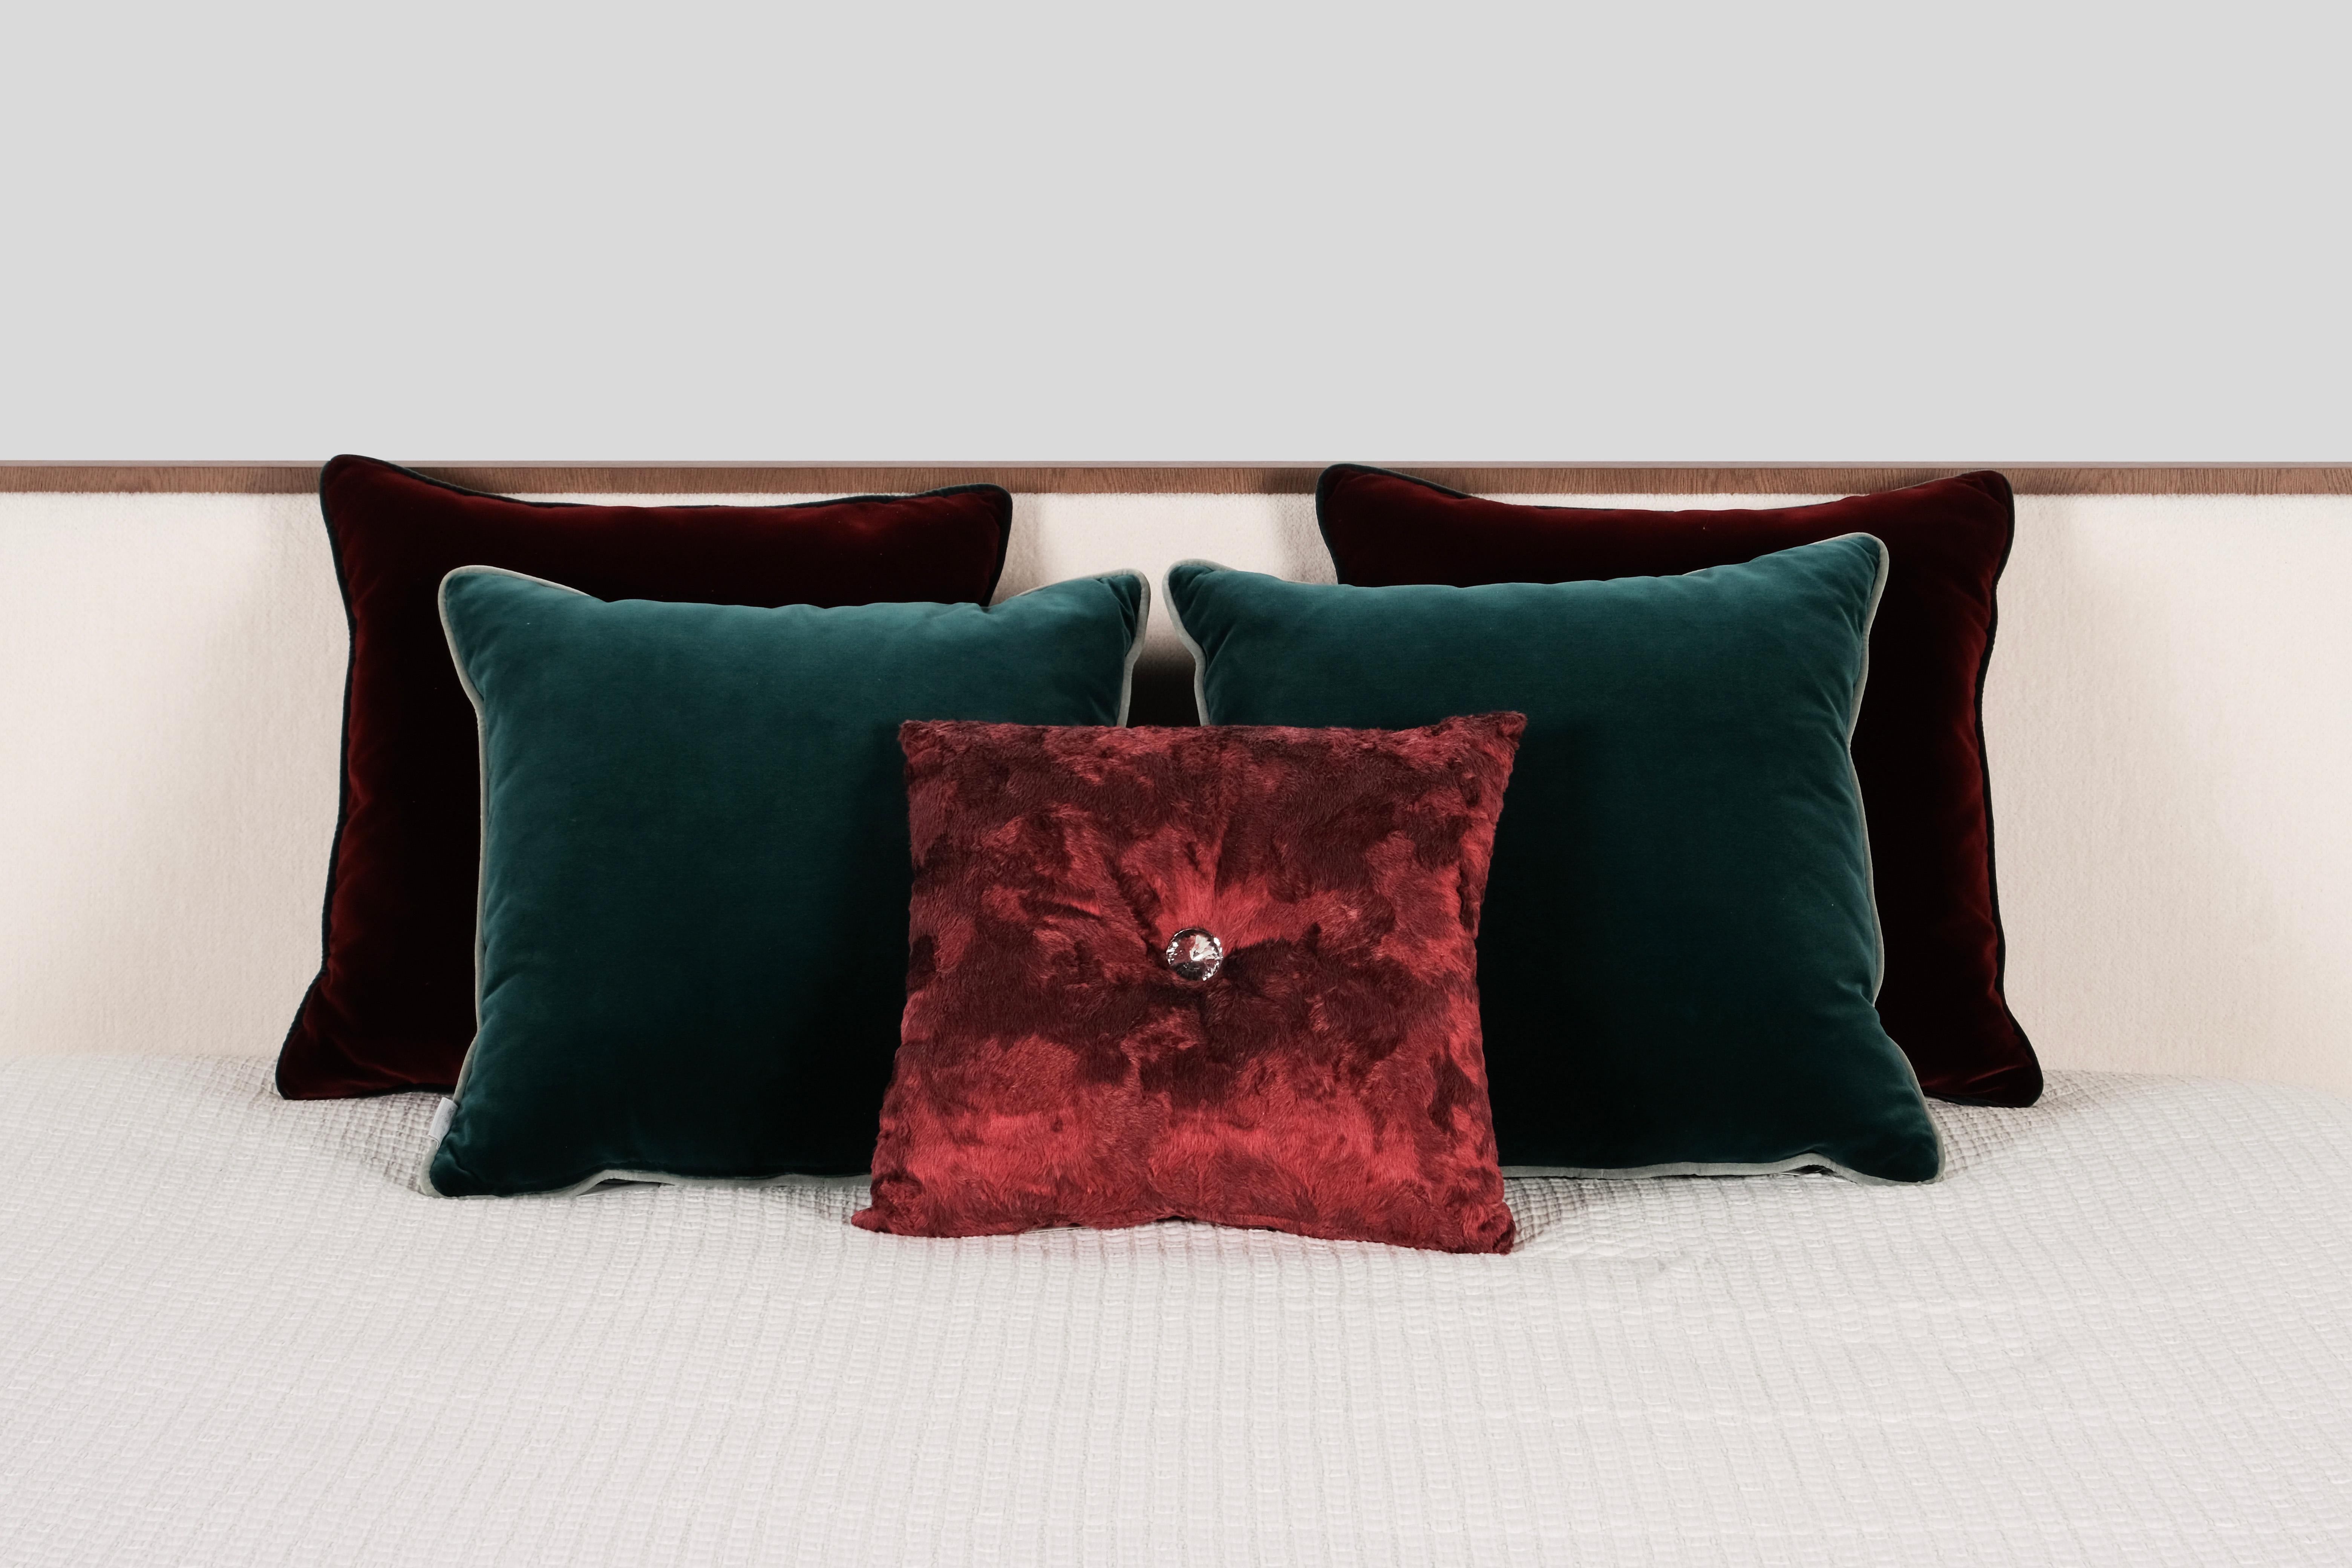 Set/5 Decorative Pillows, Lusitanus Home Collection by Greenapple.

Handmade decorative pillow set with exquisite details.

2x 910144 Square cushion in dark red velvet with green velvet piping.
Dimensions:
W.50 x H.50 cm / W.19.69 x H.19.69 in

2x